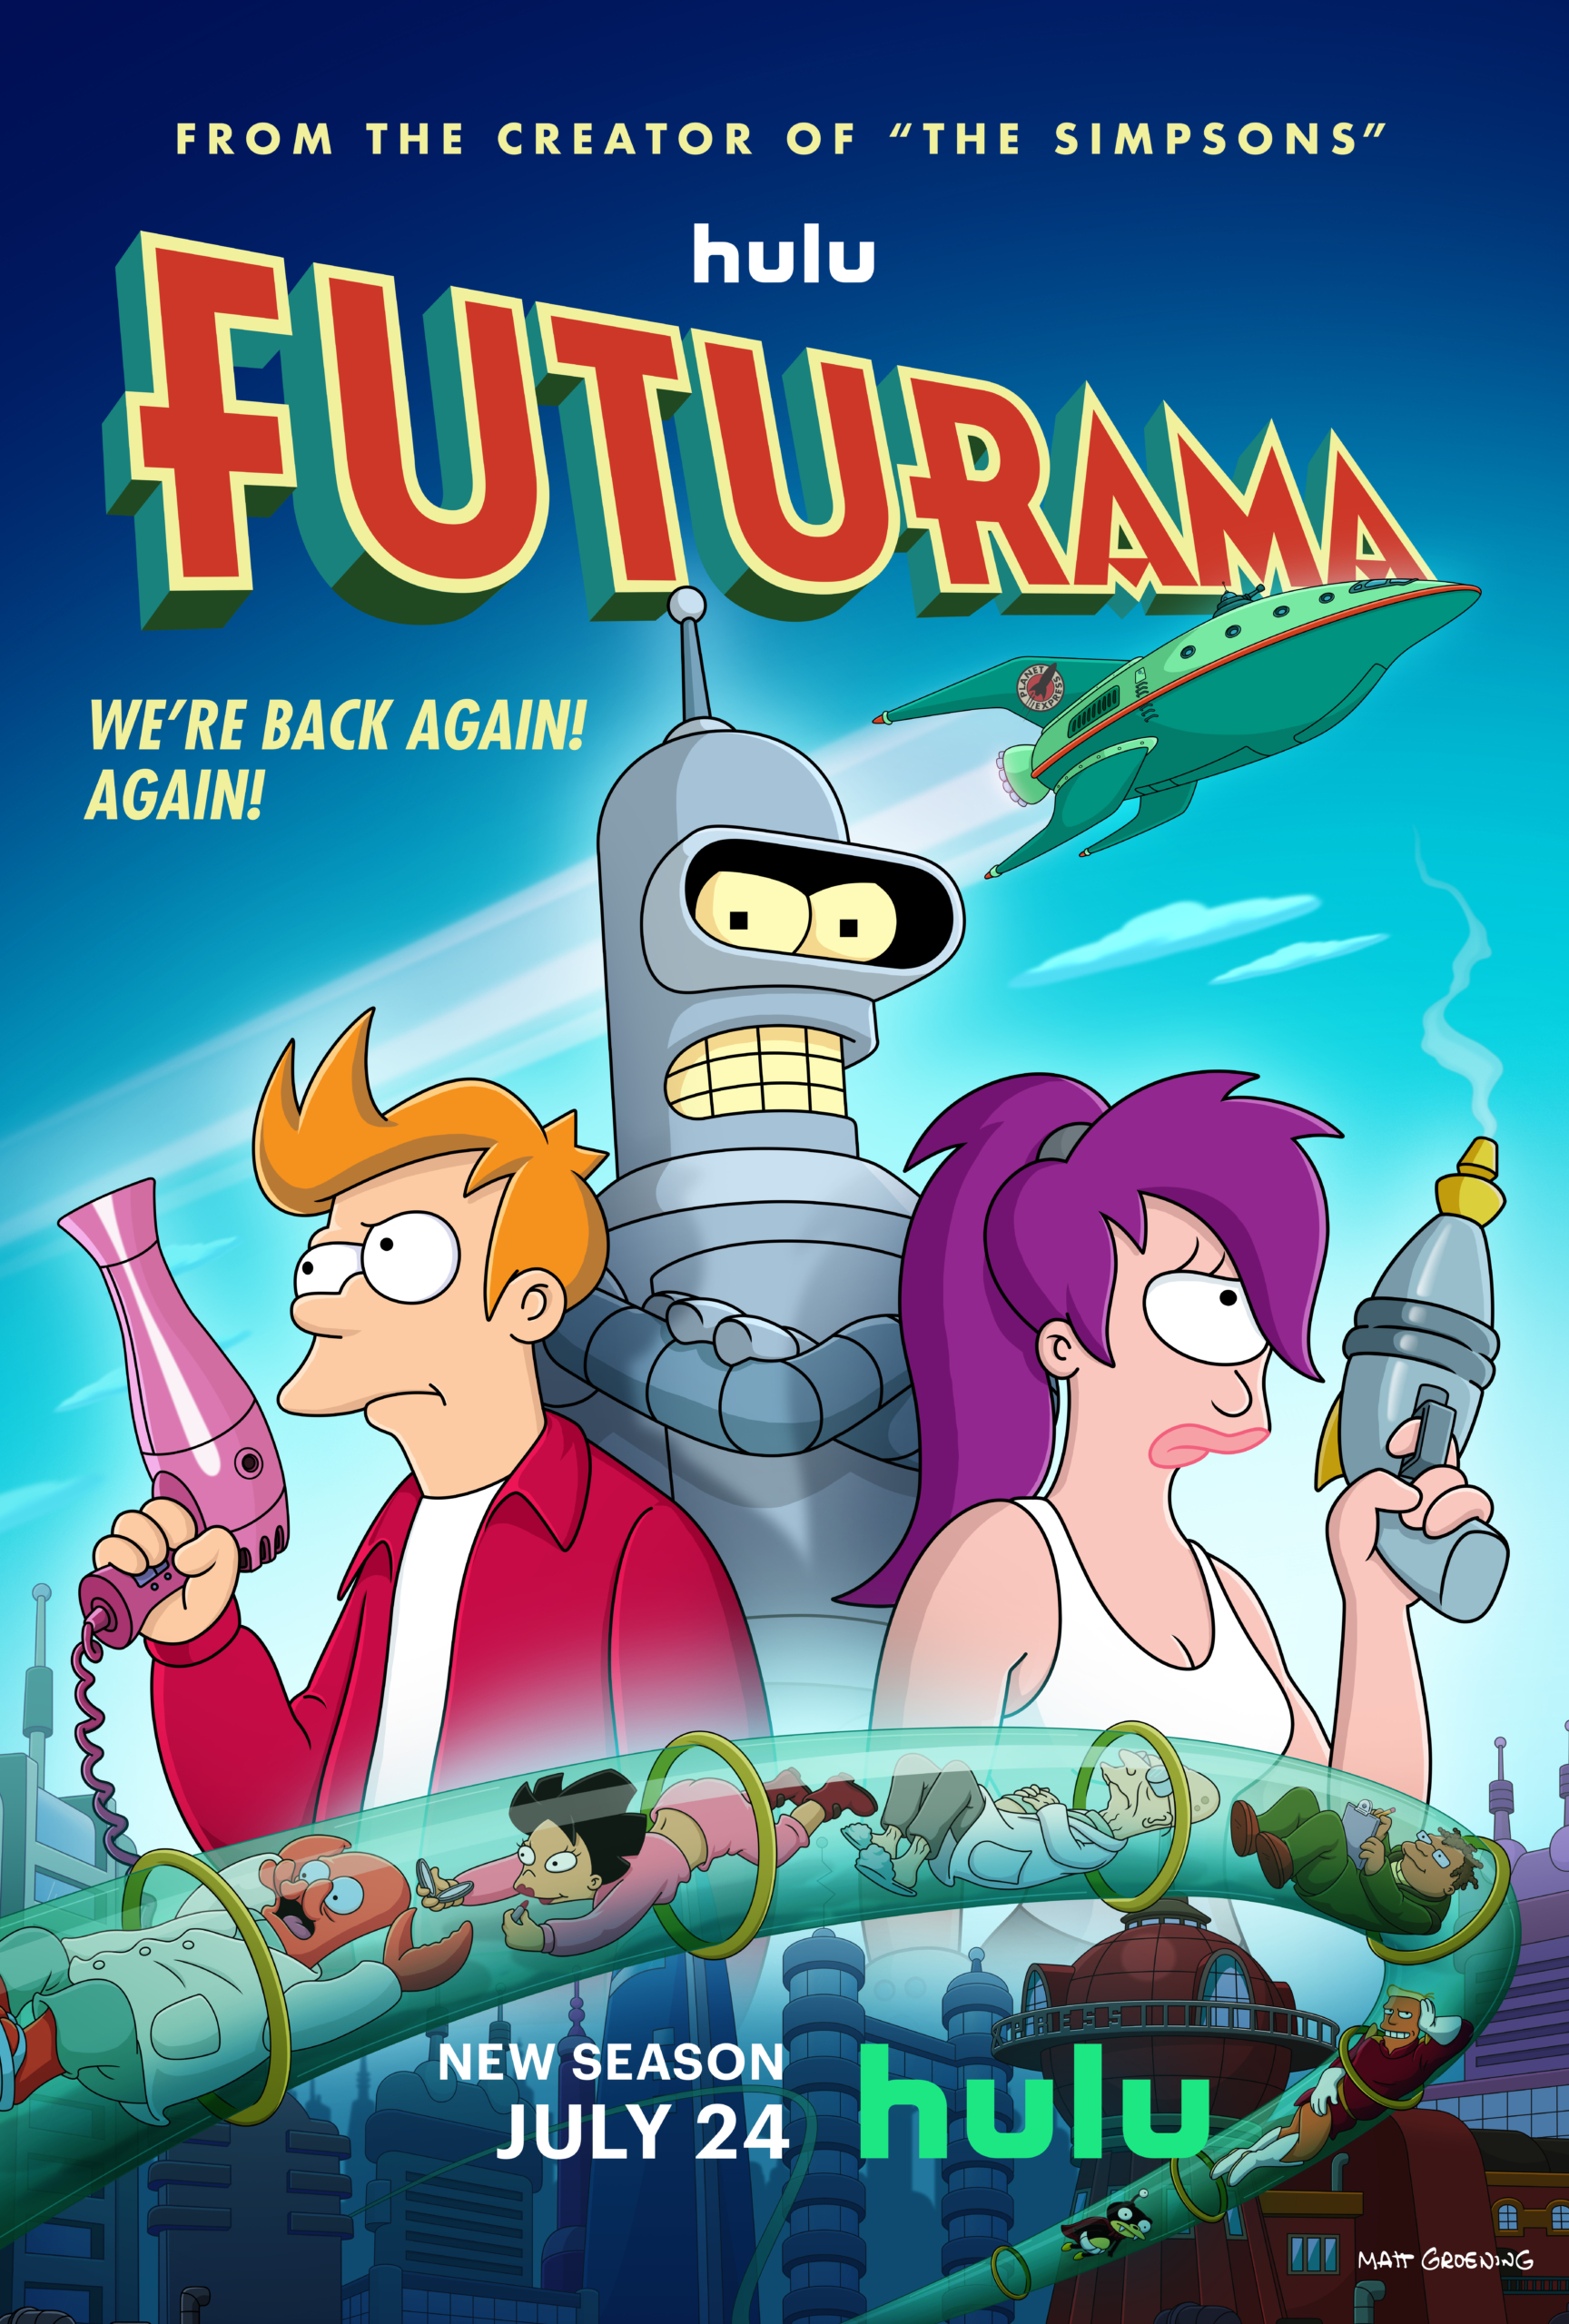 Back To The Futurama: A new series for the Planet Express Crew